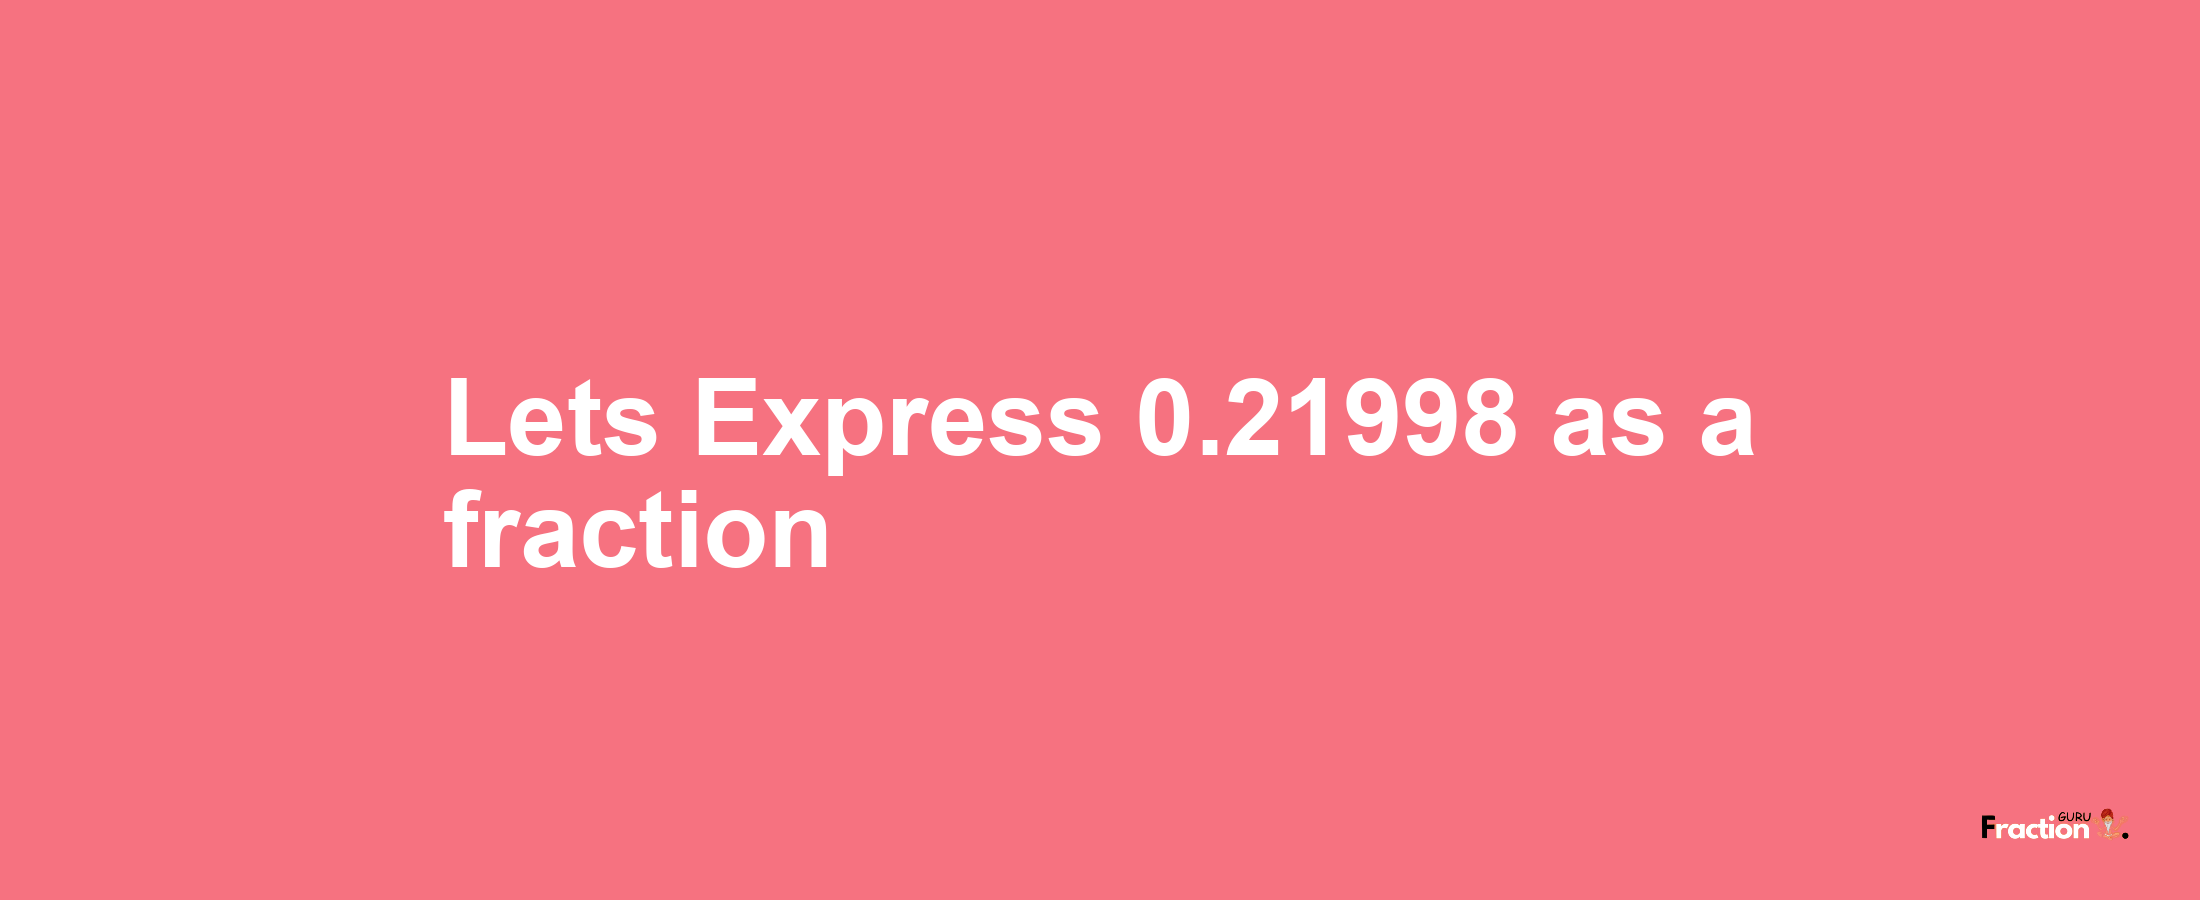 Lets Express 0.21998 as afraction